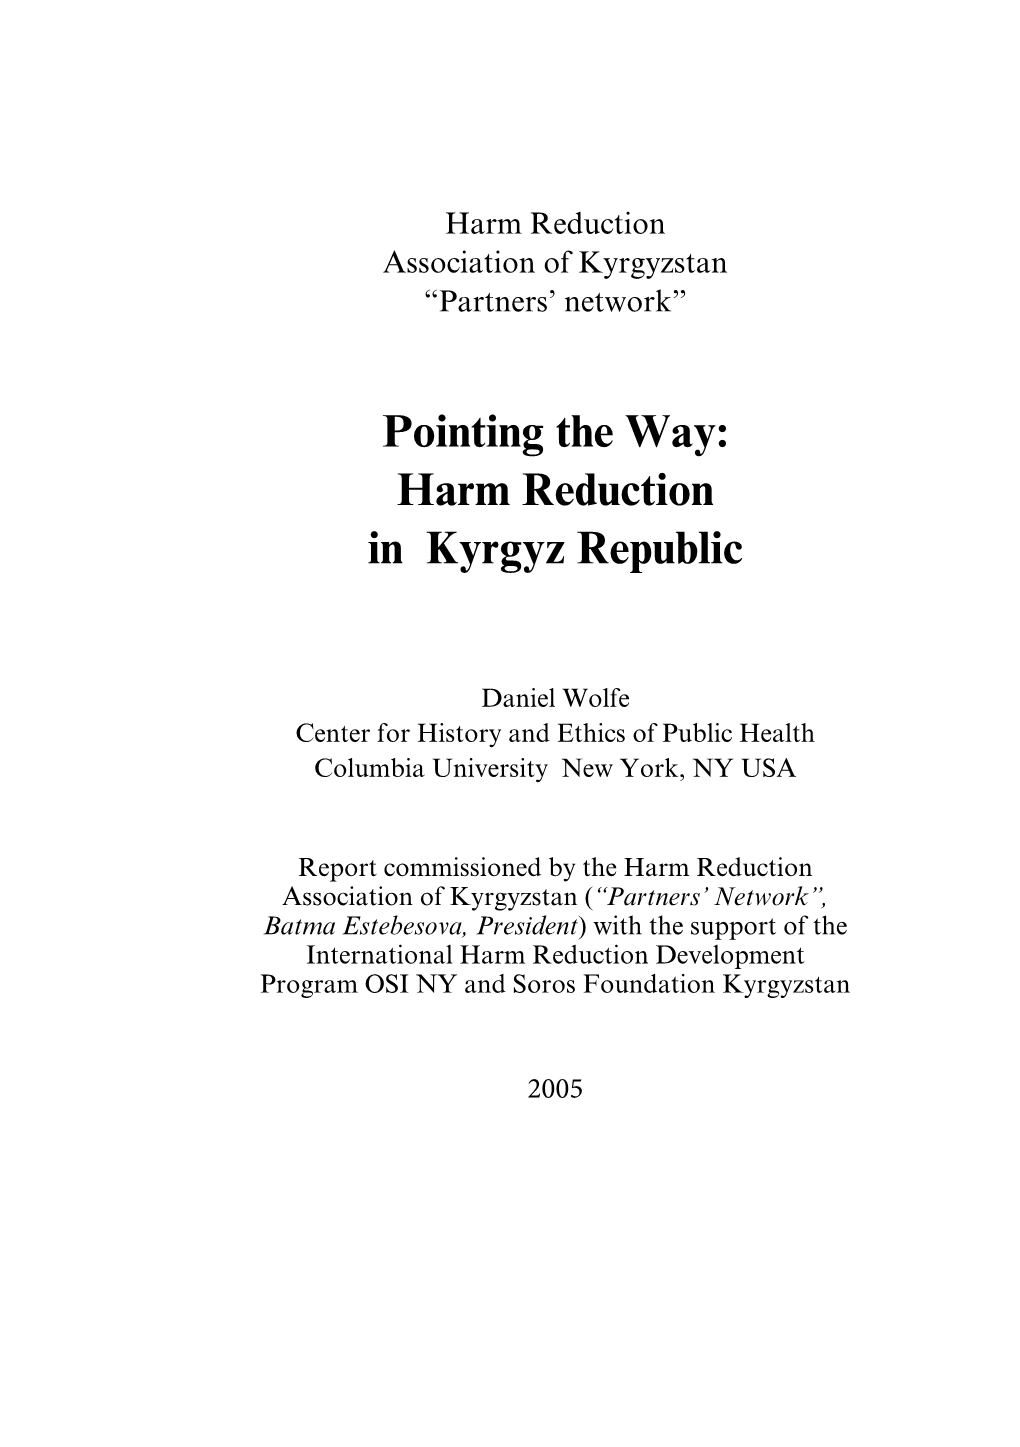 Pointing the Way: Harm Reduction in Kyrgyz Republic